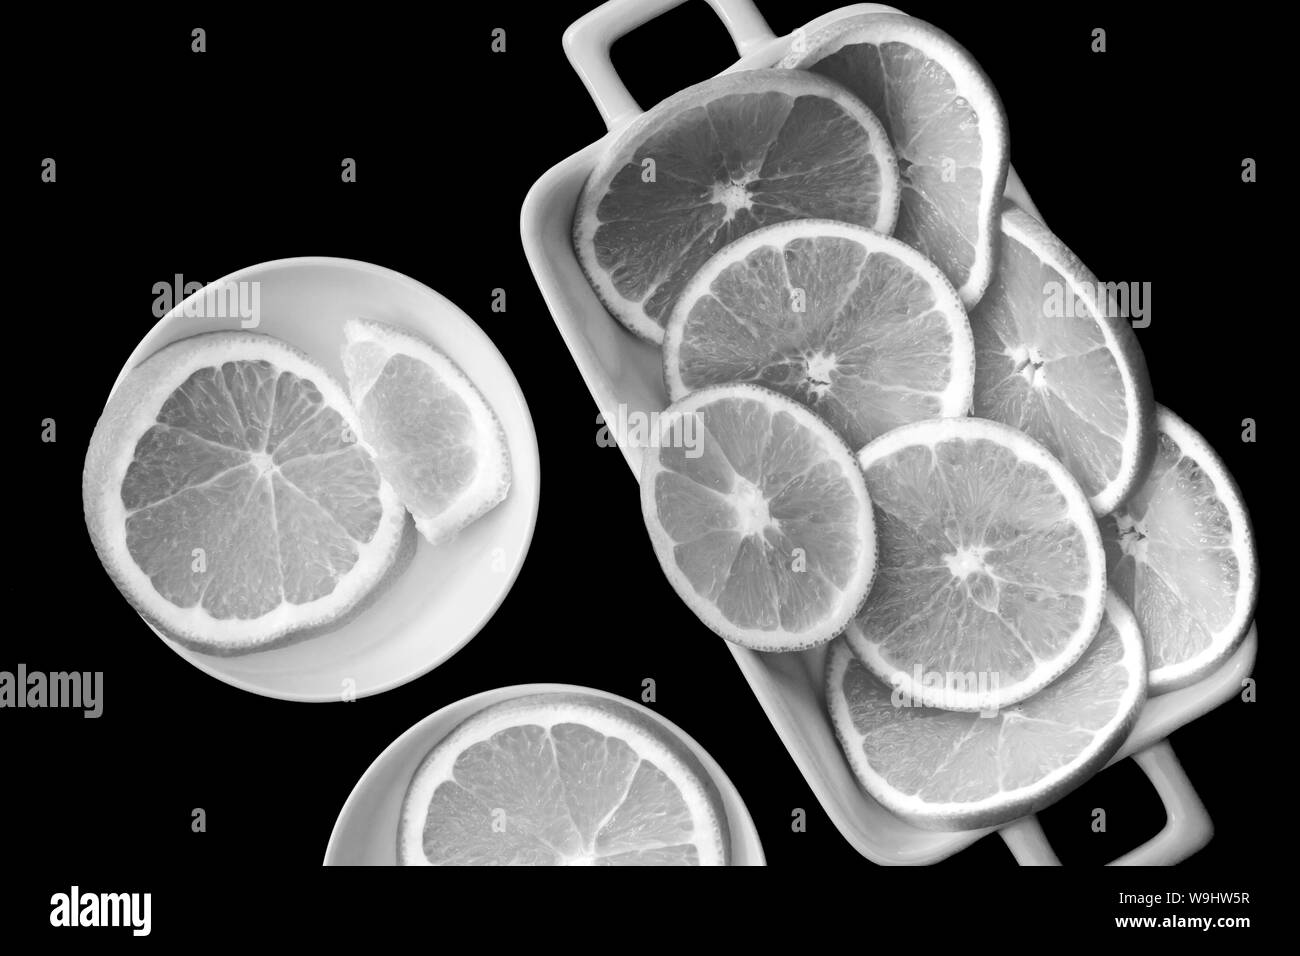 Slices of orange on  plates in black and white. Stock Photo